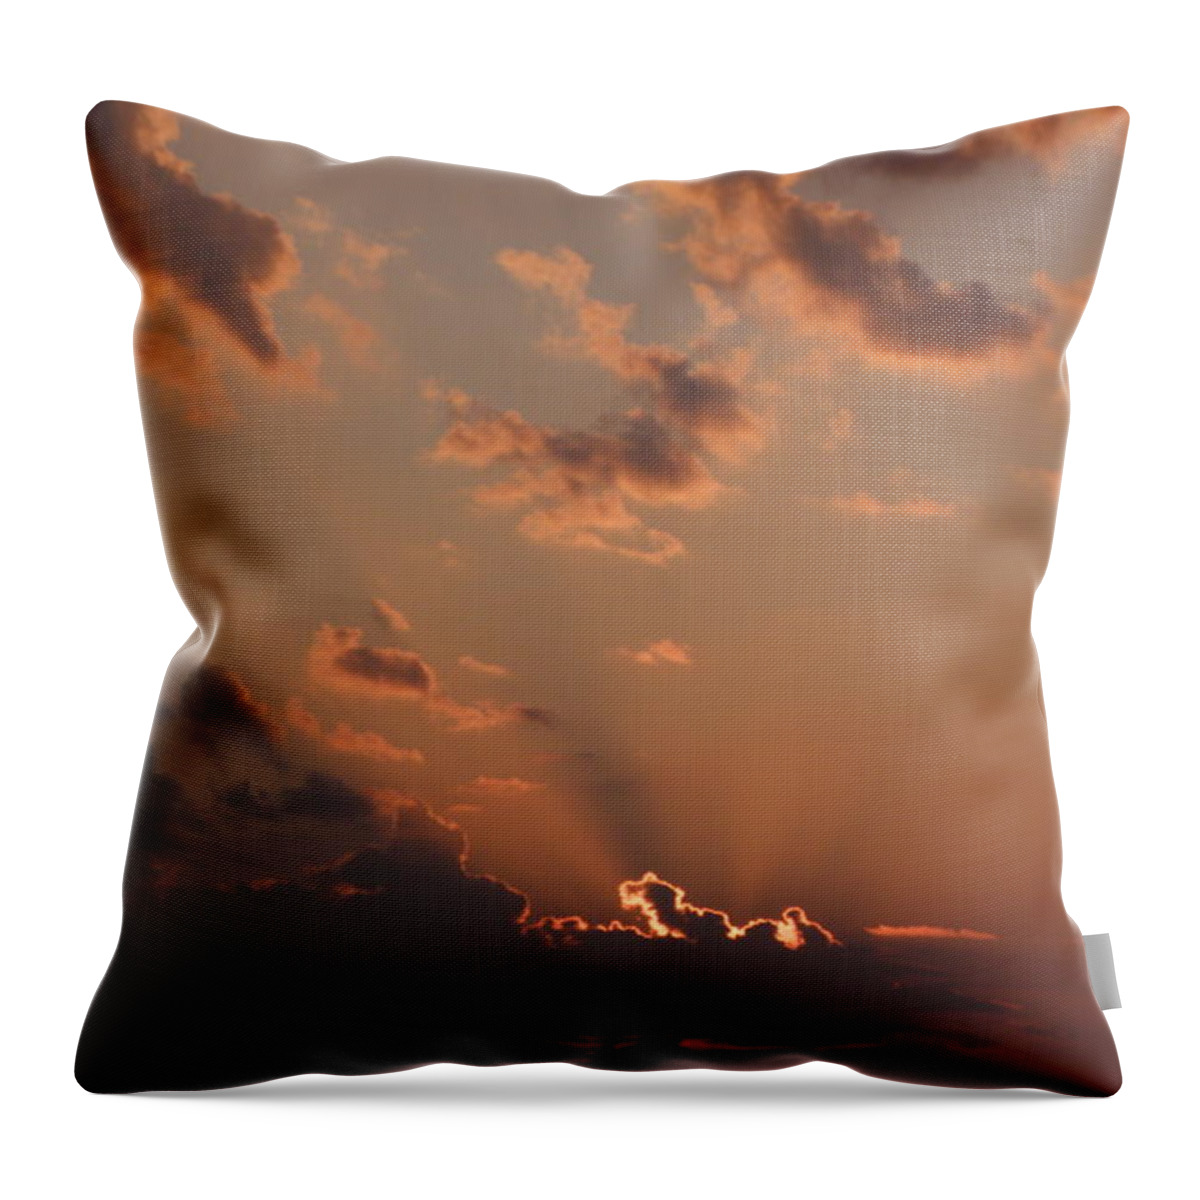 Sunrise Throw Pillow featuring the photograph Sunrise In The Clouds by Kim Galluzzo Wozniak